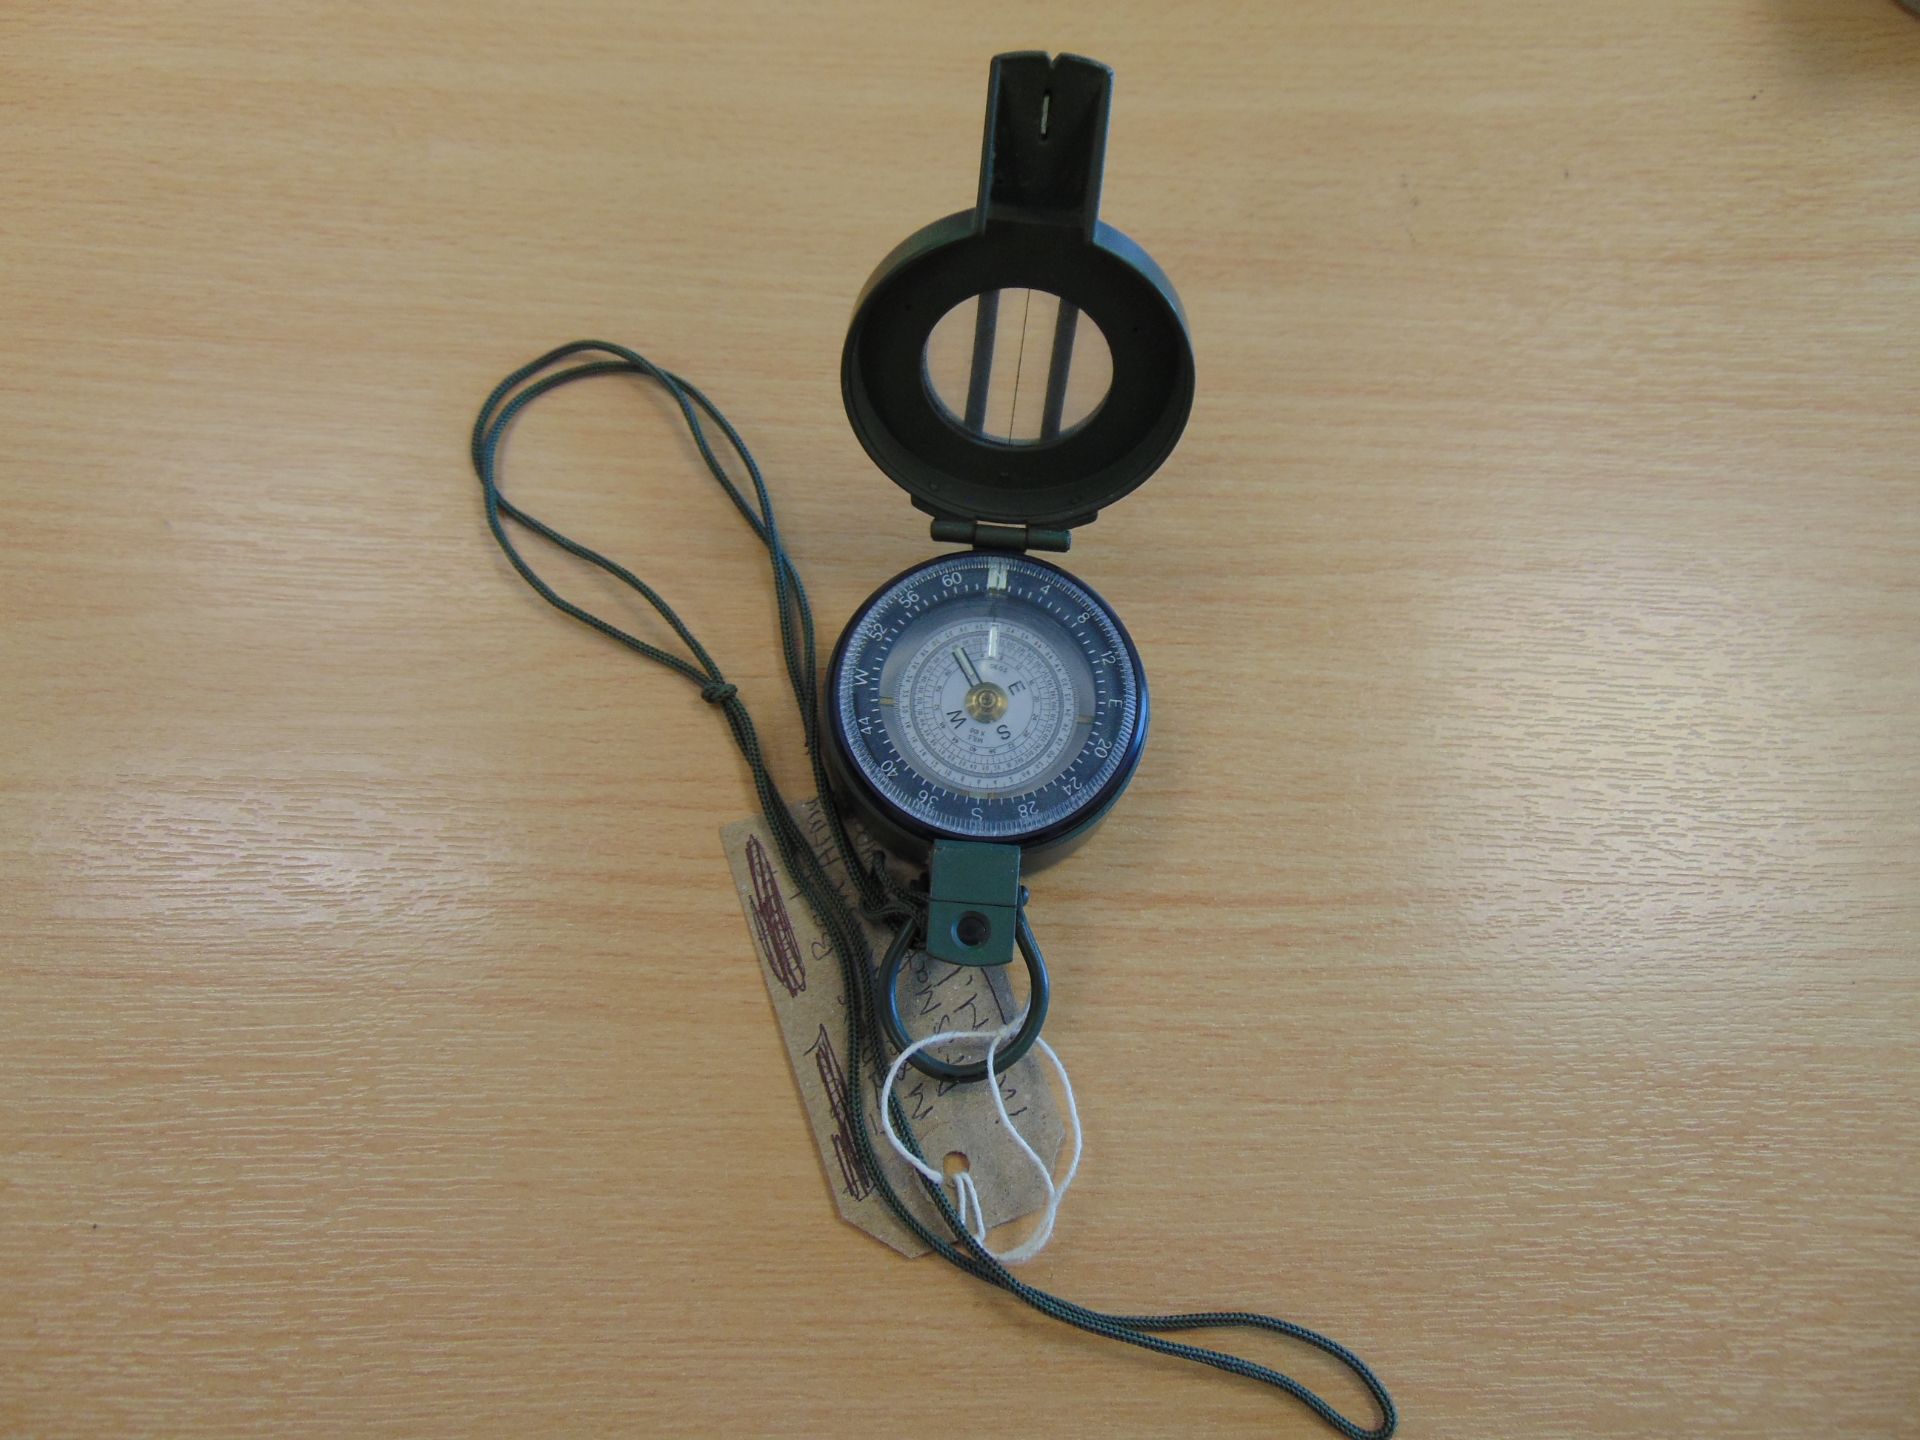 Francis Barker M88 British Army Prismatic Compass in Mils - Image 4 of 5